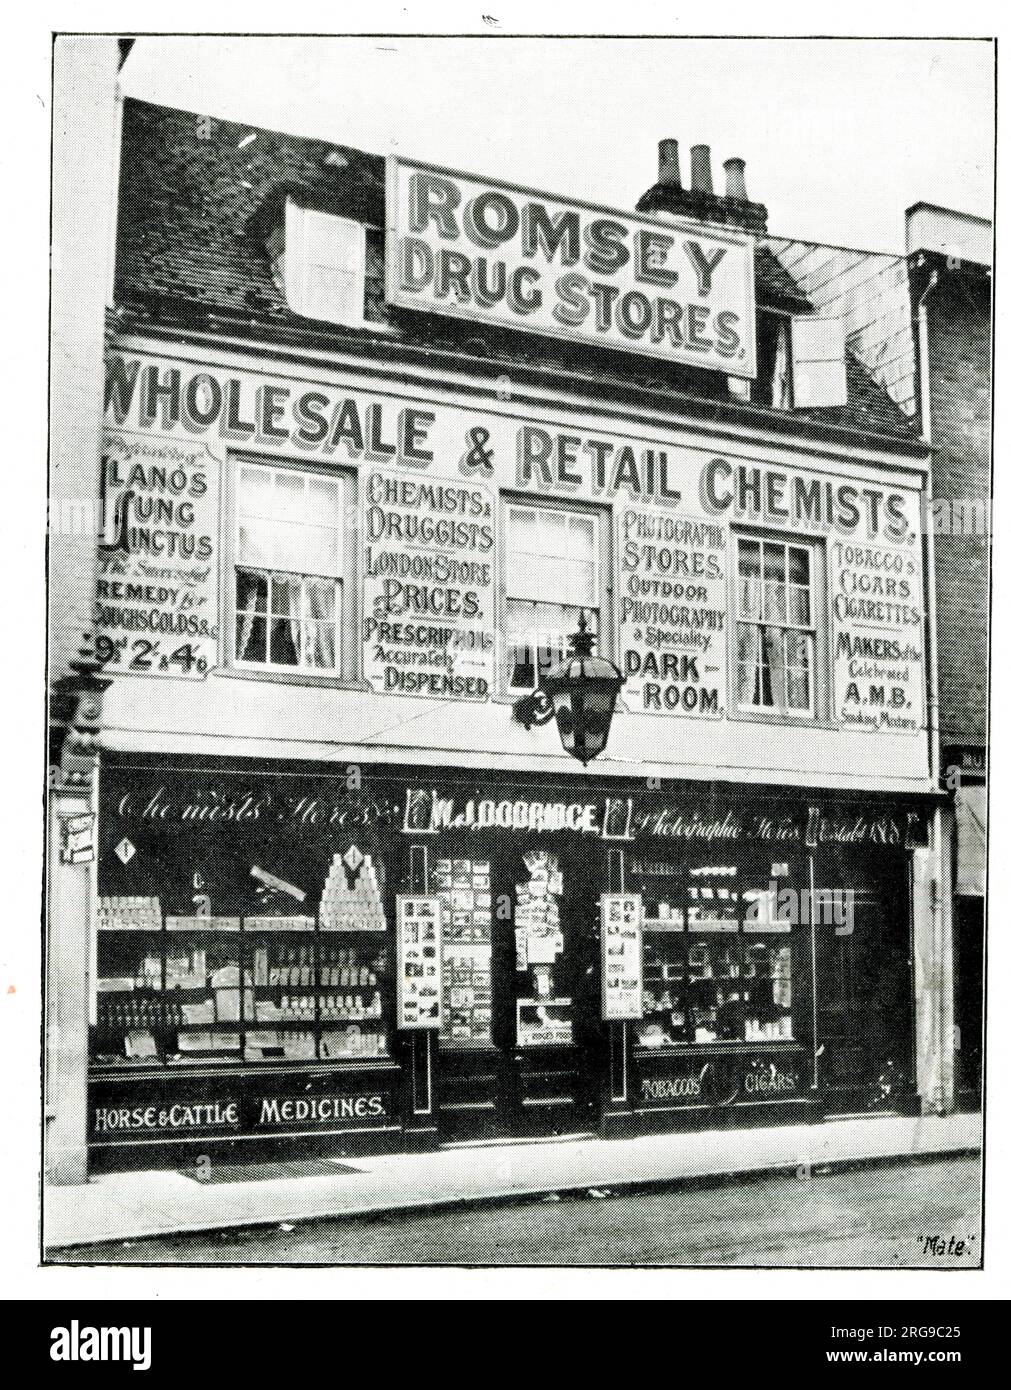 Magasin, Romsey Drug Stores, Church Street, Romsey, Hampshire. Banque D'Images